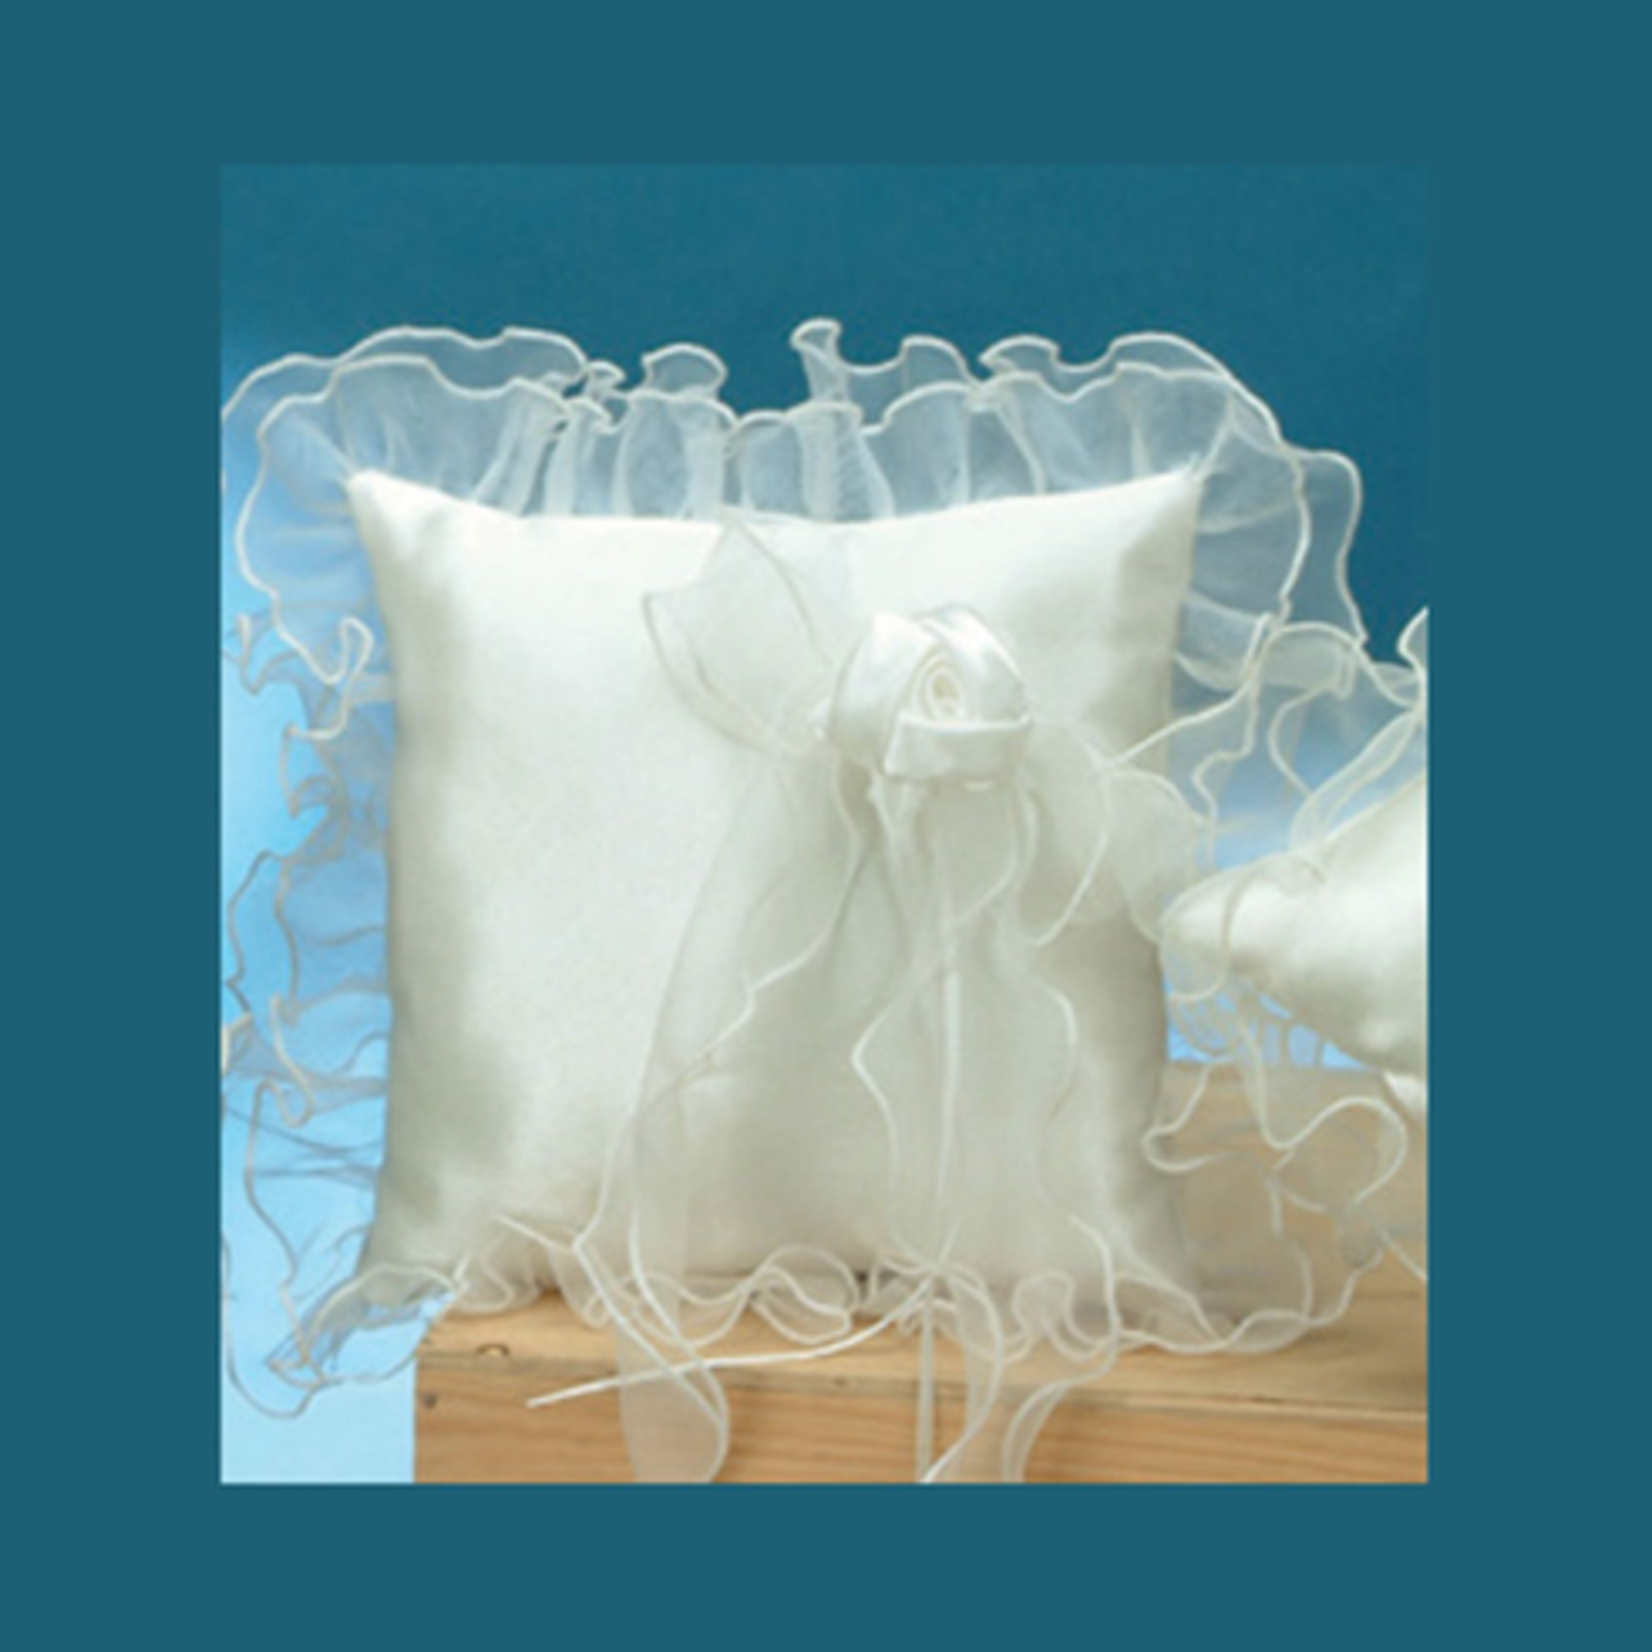 7'' SQUARE WHT PLLW WITH ORGANZA, REG $8.99, 50%  OFF